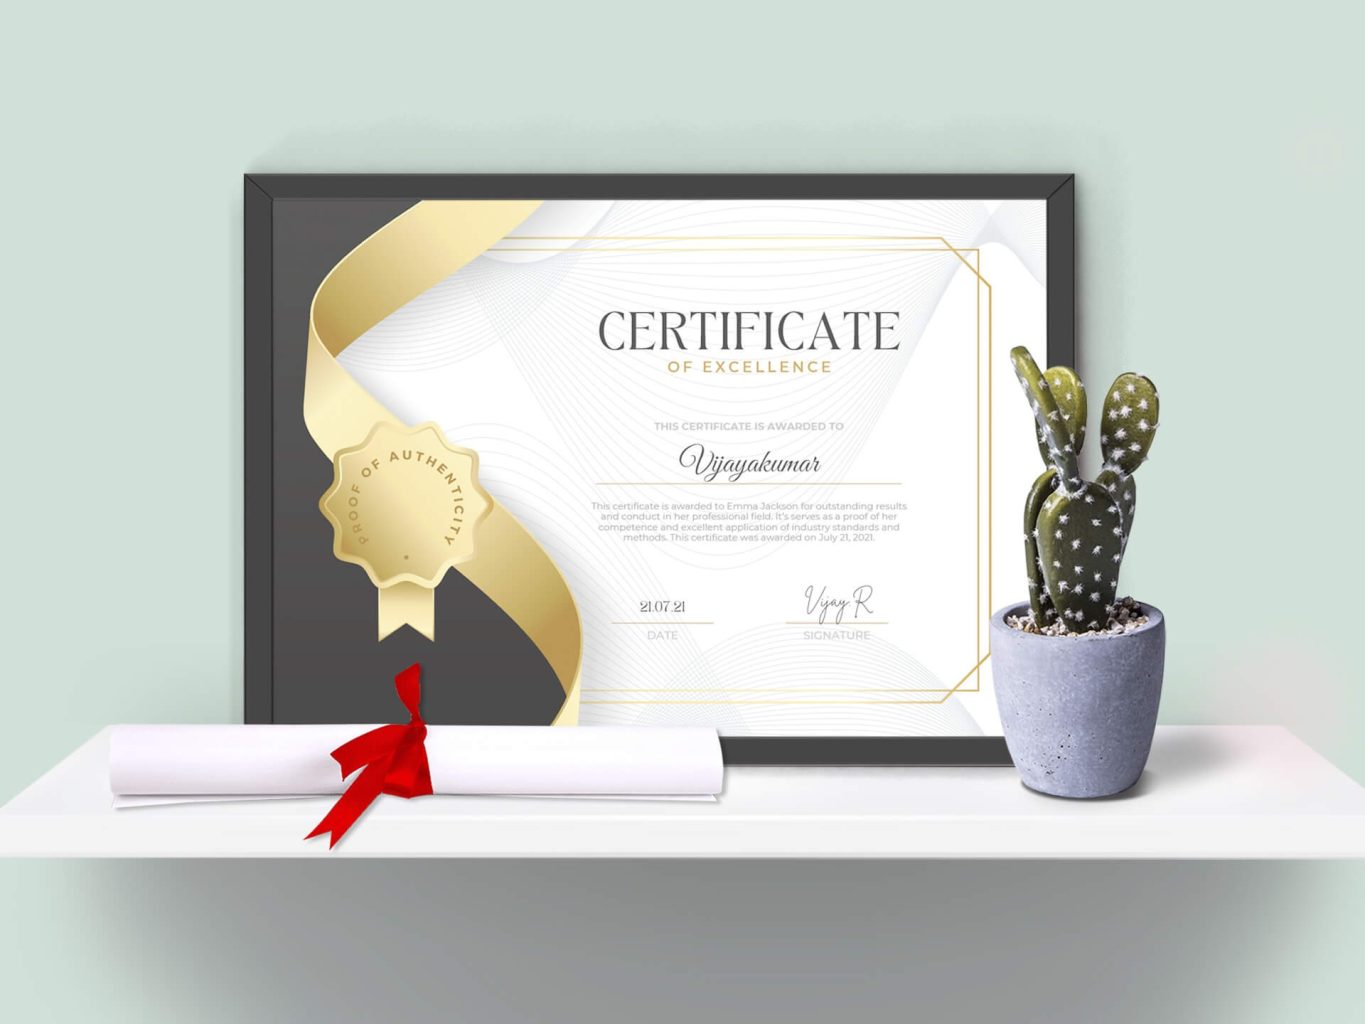 Apostille on a certificate of advanced training